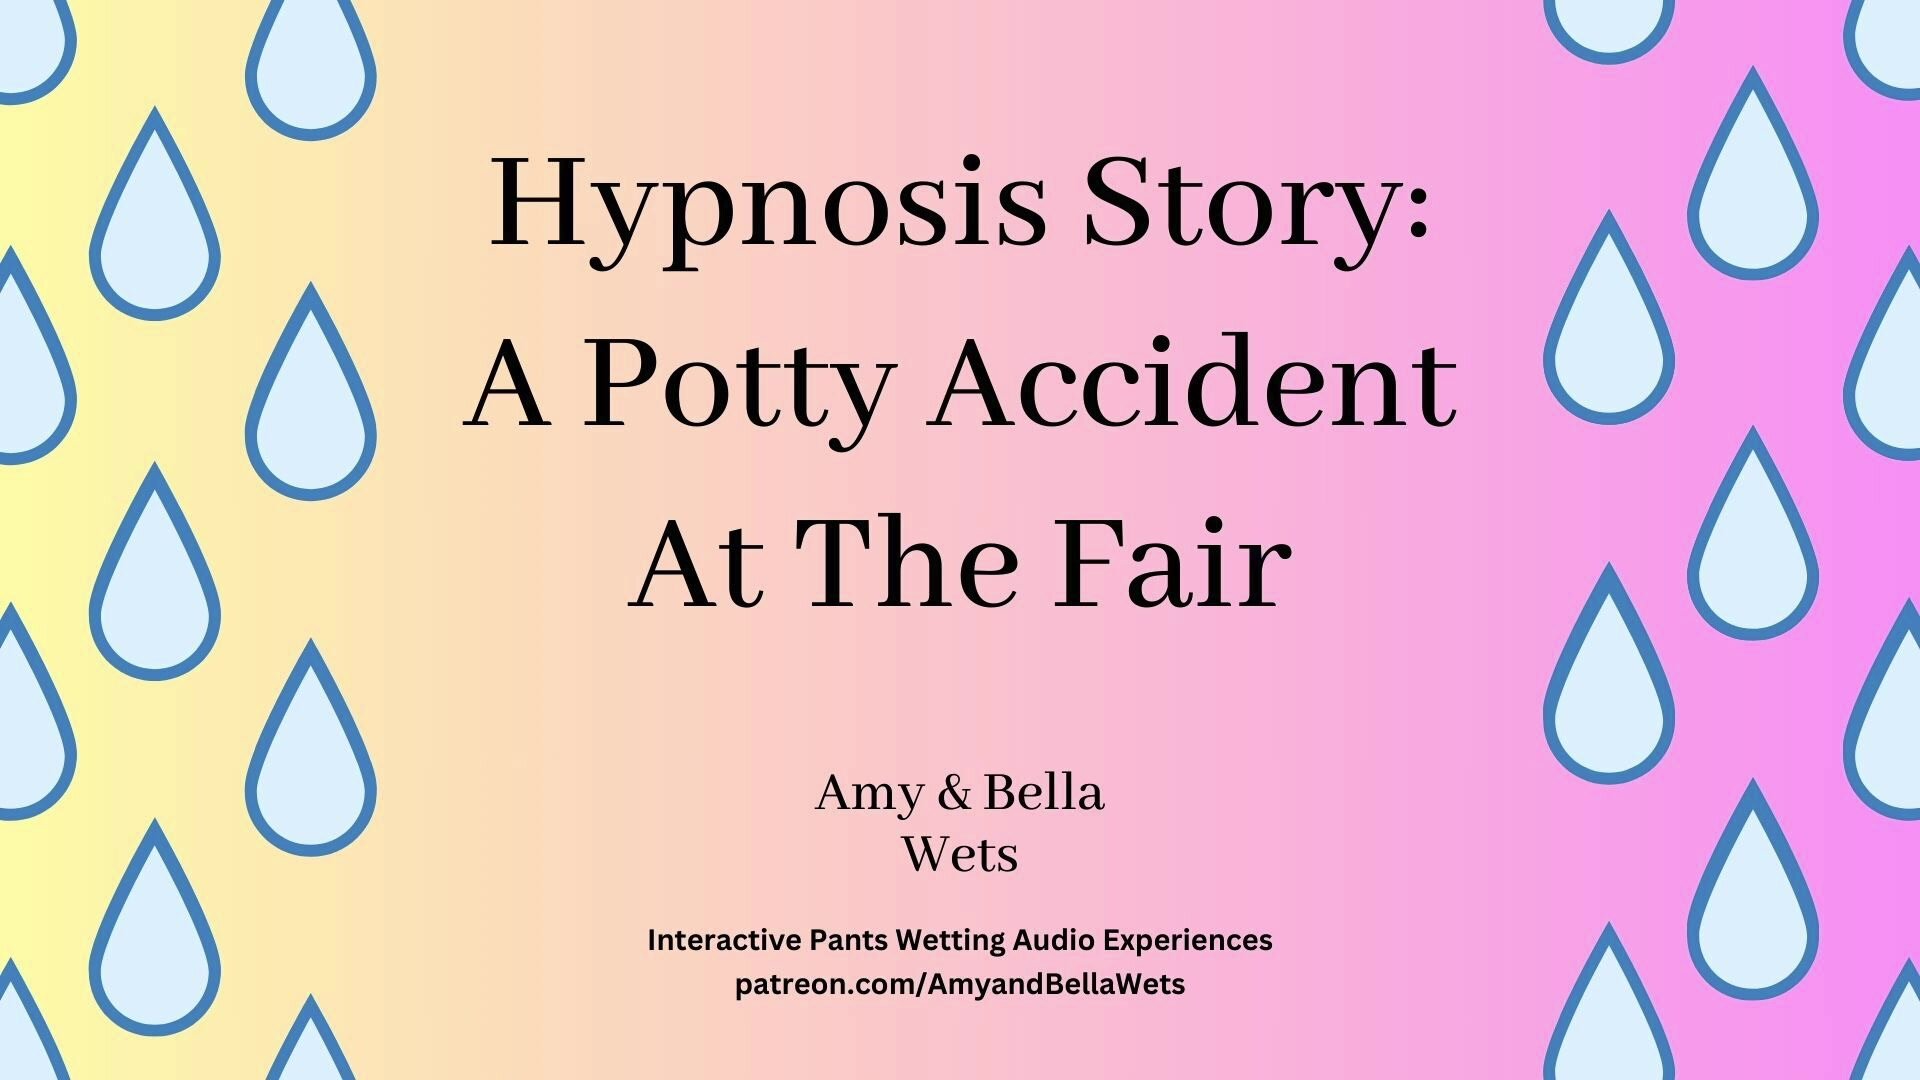 Hypnosis Story - Potty Accident At The Fair